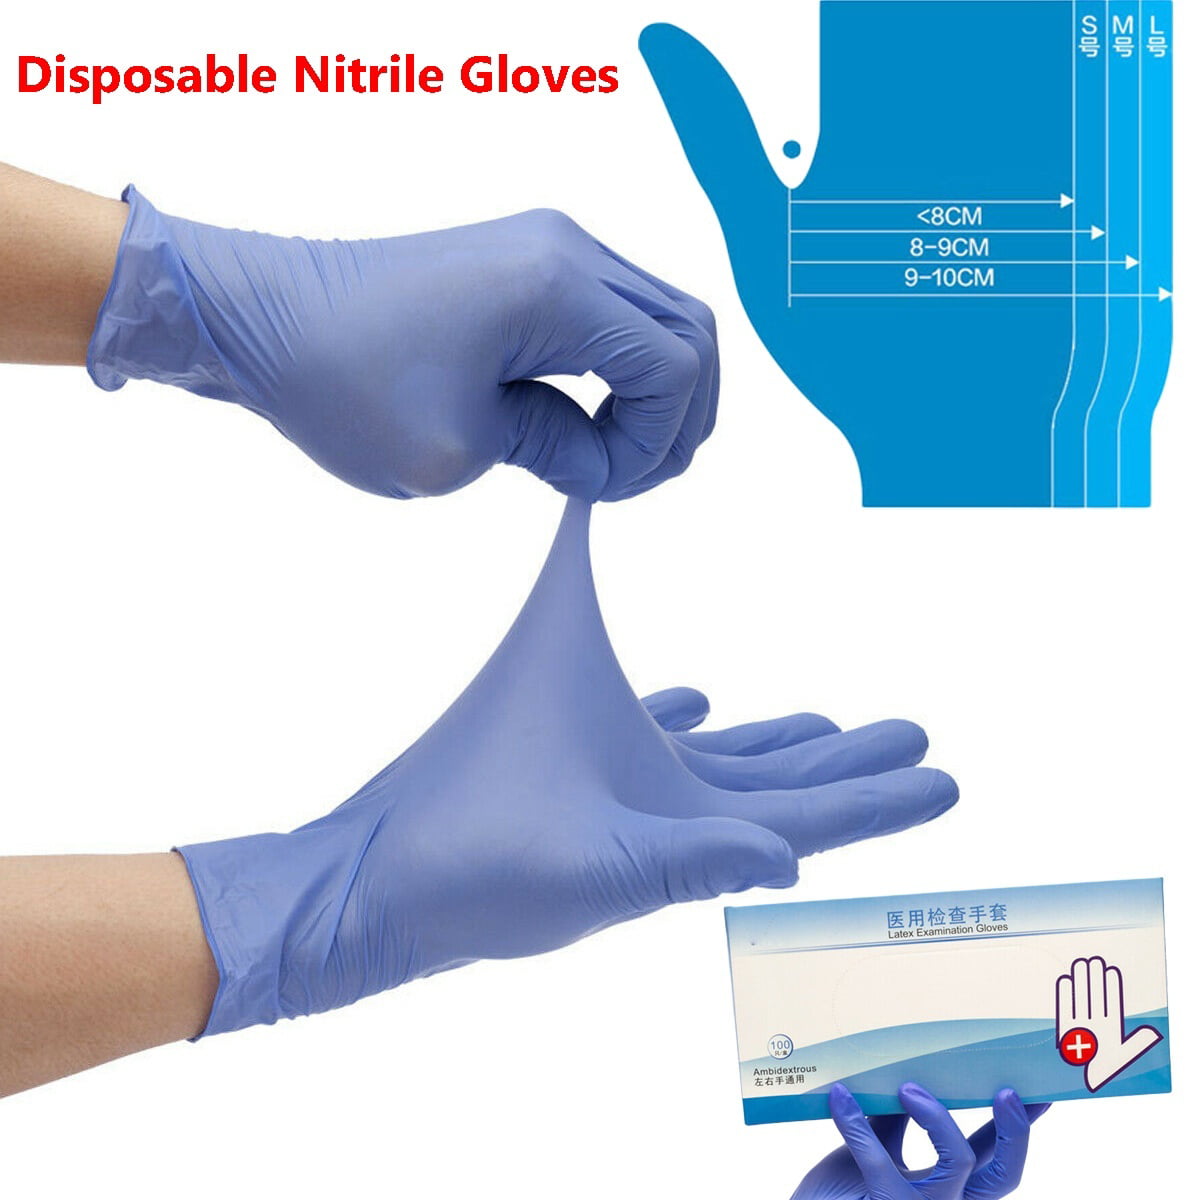 M, White 100 Pcs Nitrile Disposable Gloves Powder Free Rubber Latex Free Medical Exam Gloves Non Sterile Ambidextrous Comfortable Industrial Blue White Rubber Gloves 